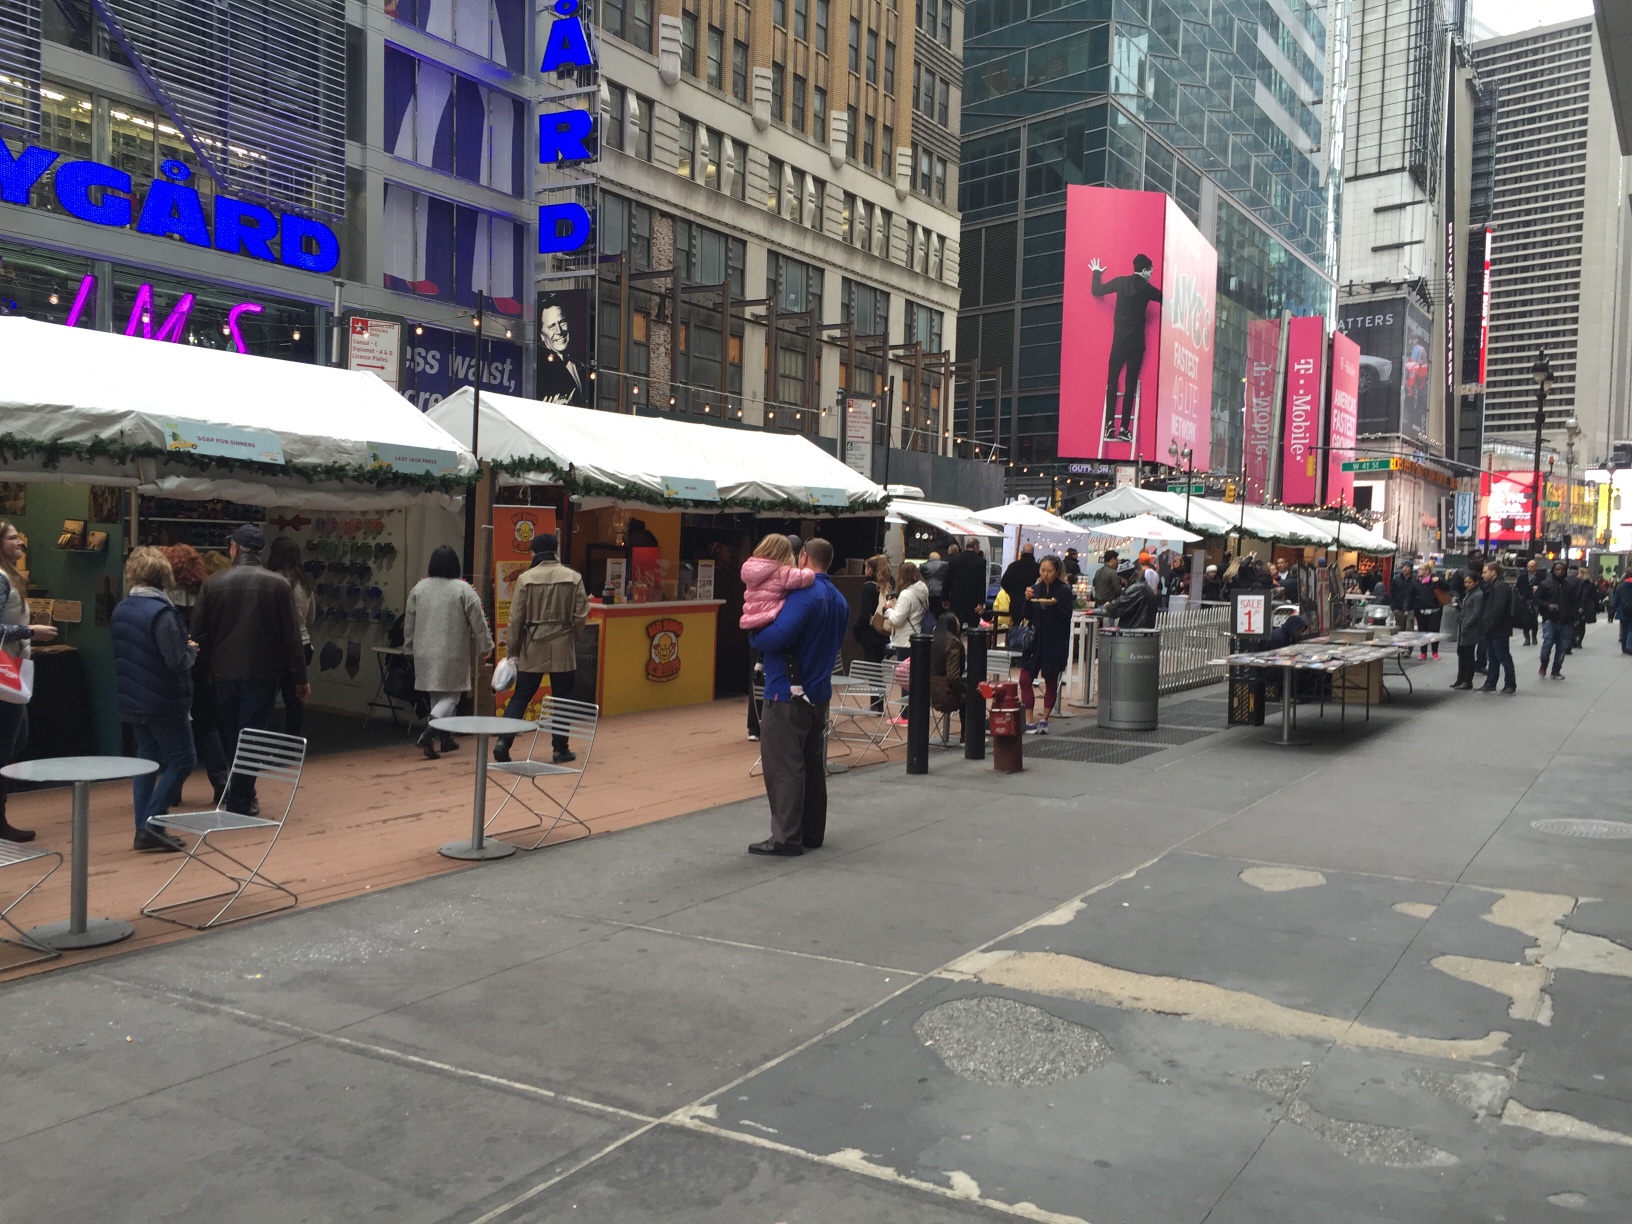 Popup holiday market in the Garment District. (Photo by Stephen Fesler)